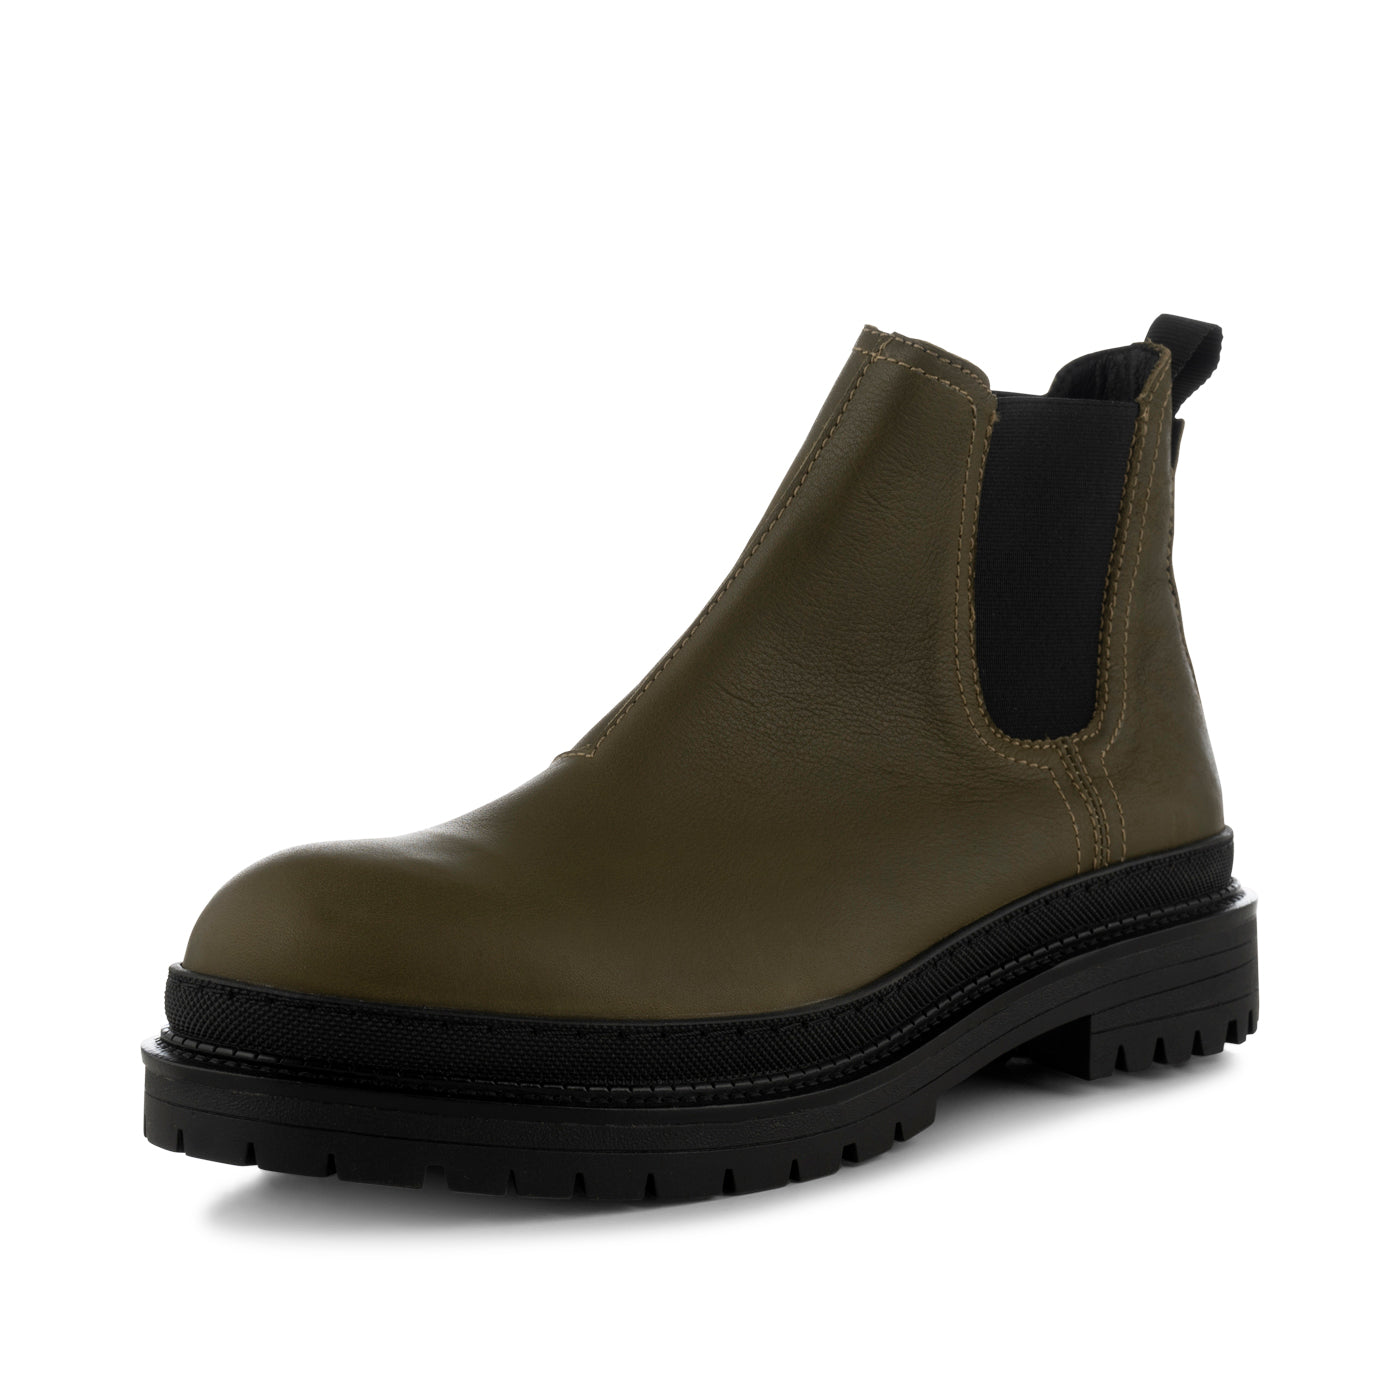 SHOE THE BEAR MENS Arvid chelsea boot leather Chelsea Boots 298 MOSS GREEN